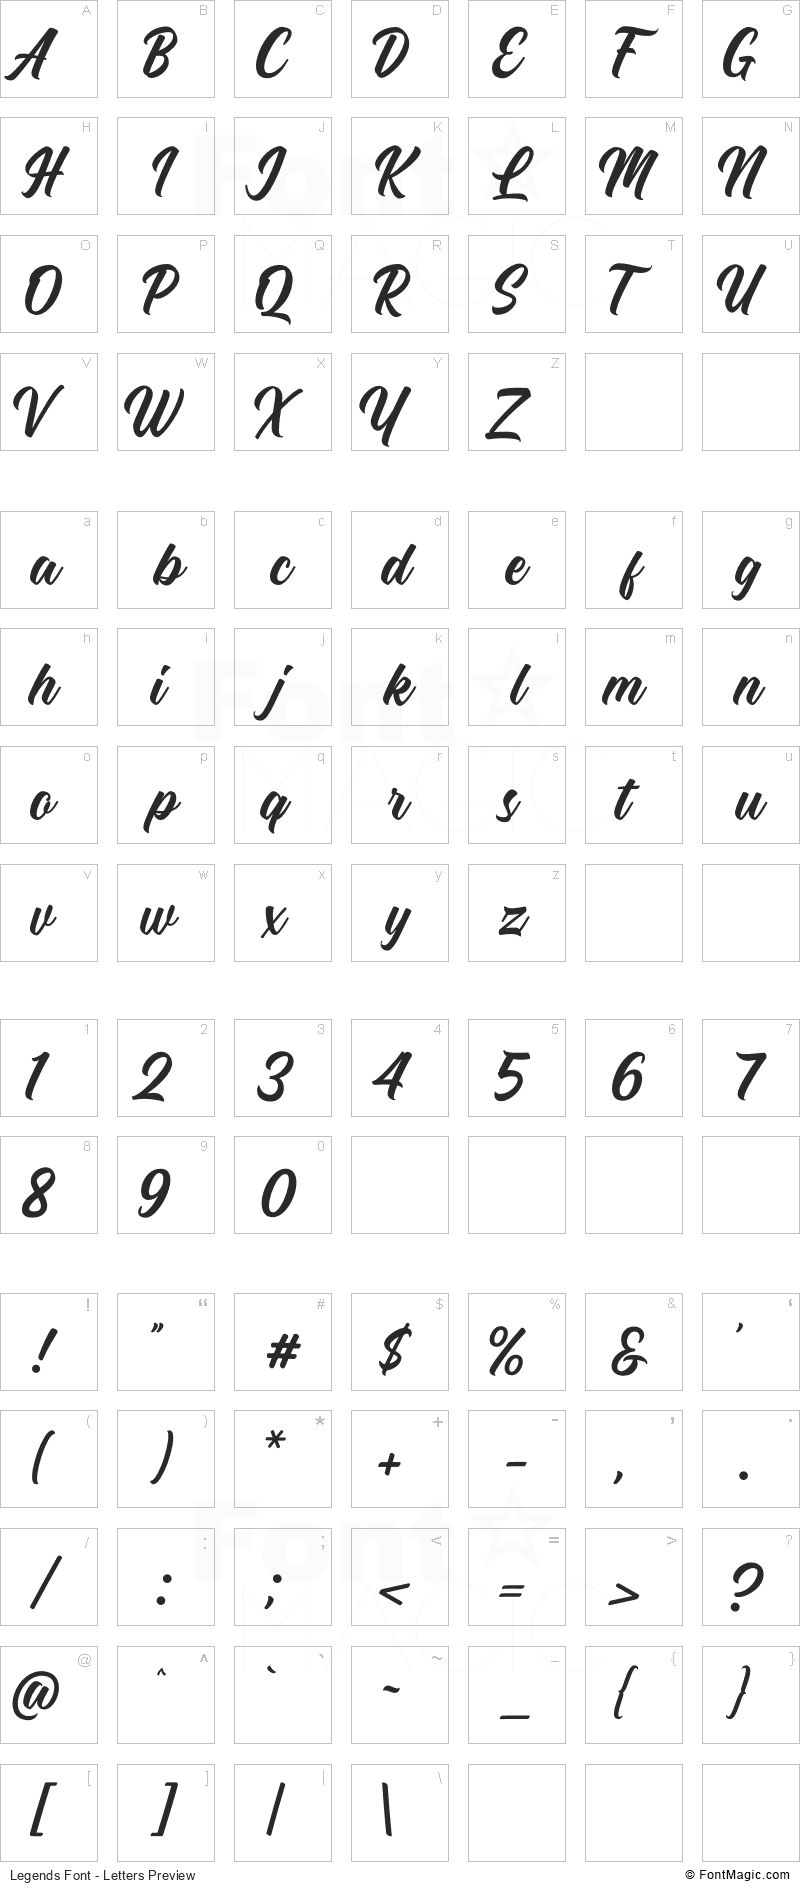 Legends Font - All Latters Preview Chart